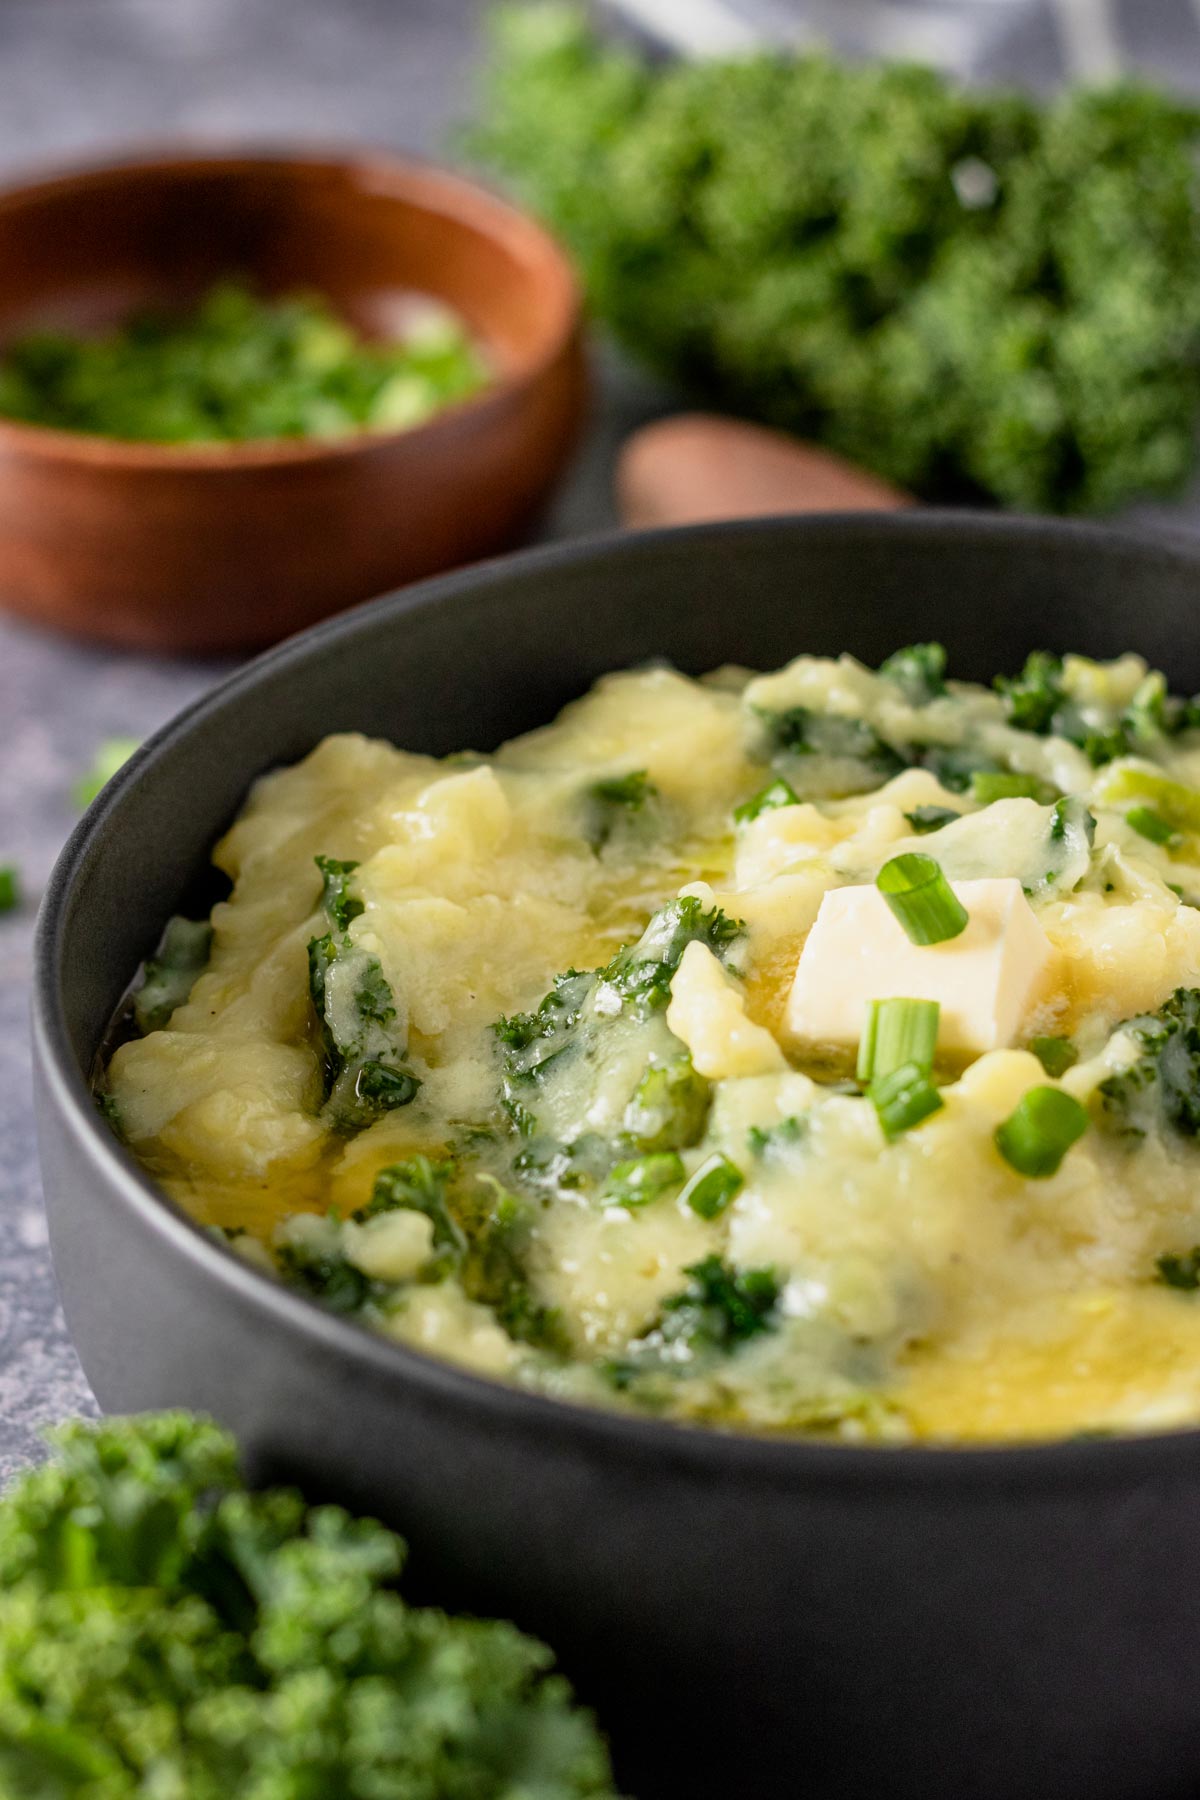 mashed potatoes with kale in a bowl